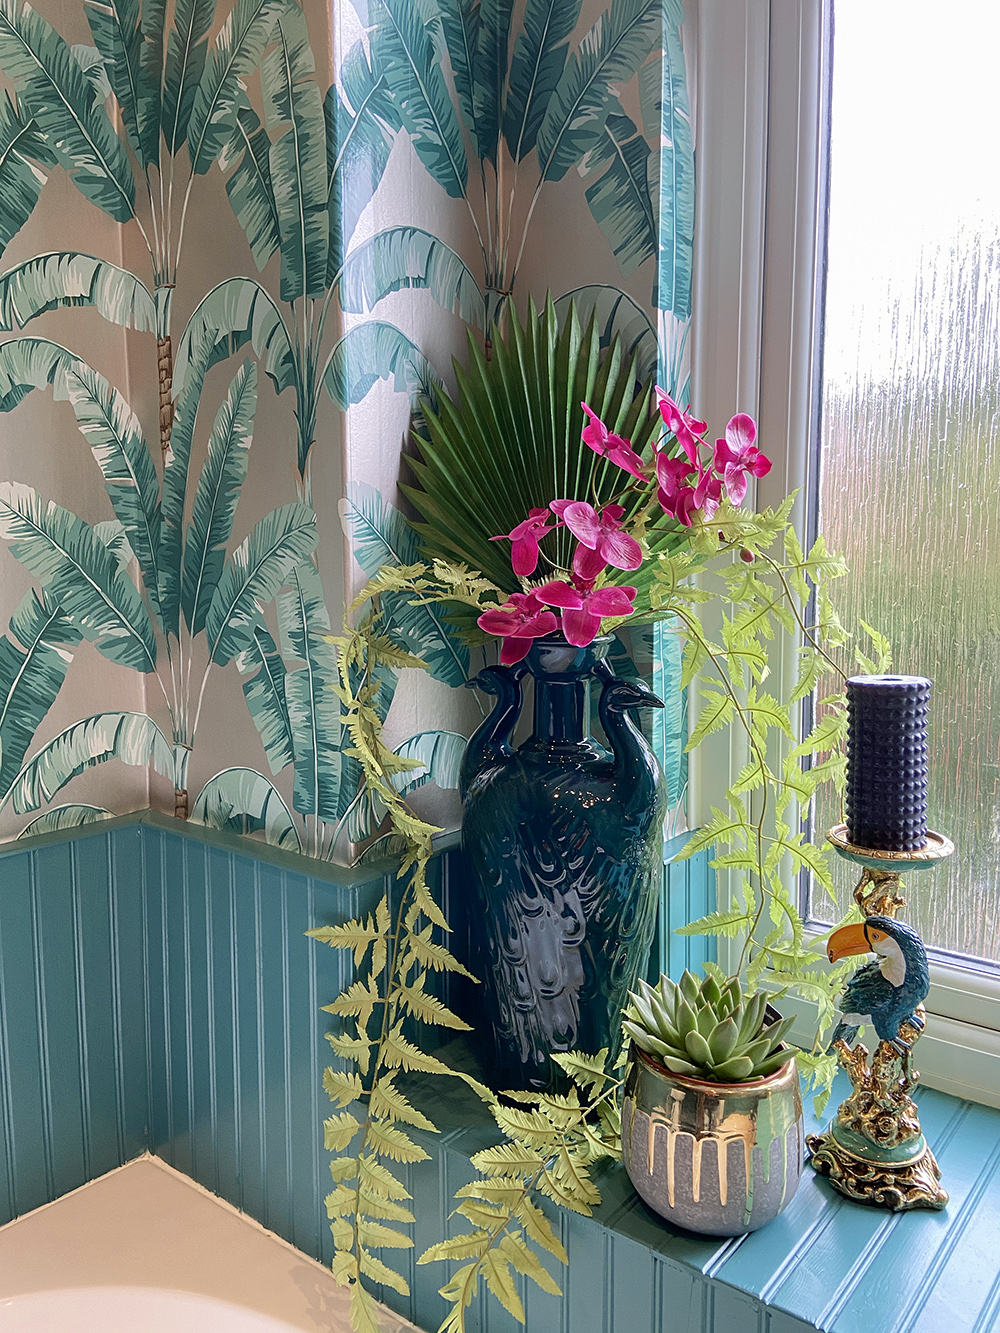 Tropical patterned wallpaper with artificial flowers and toucan candle holder to give a jungle feel